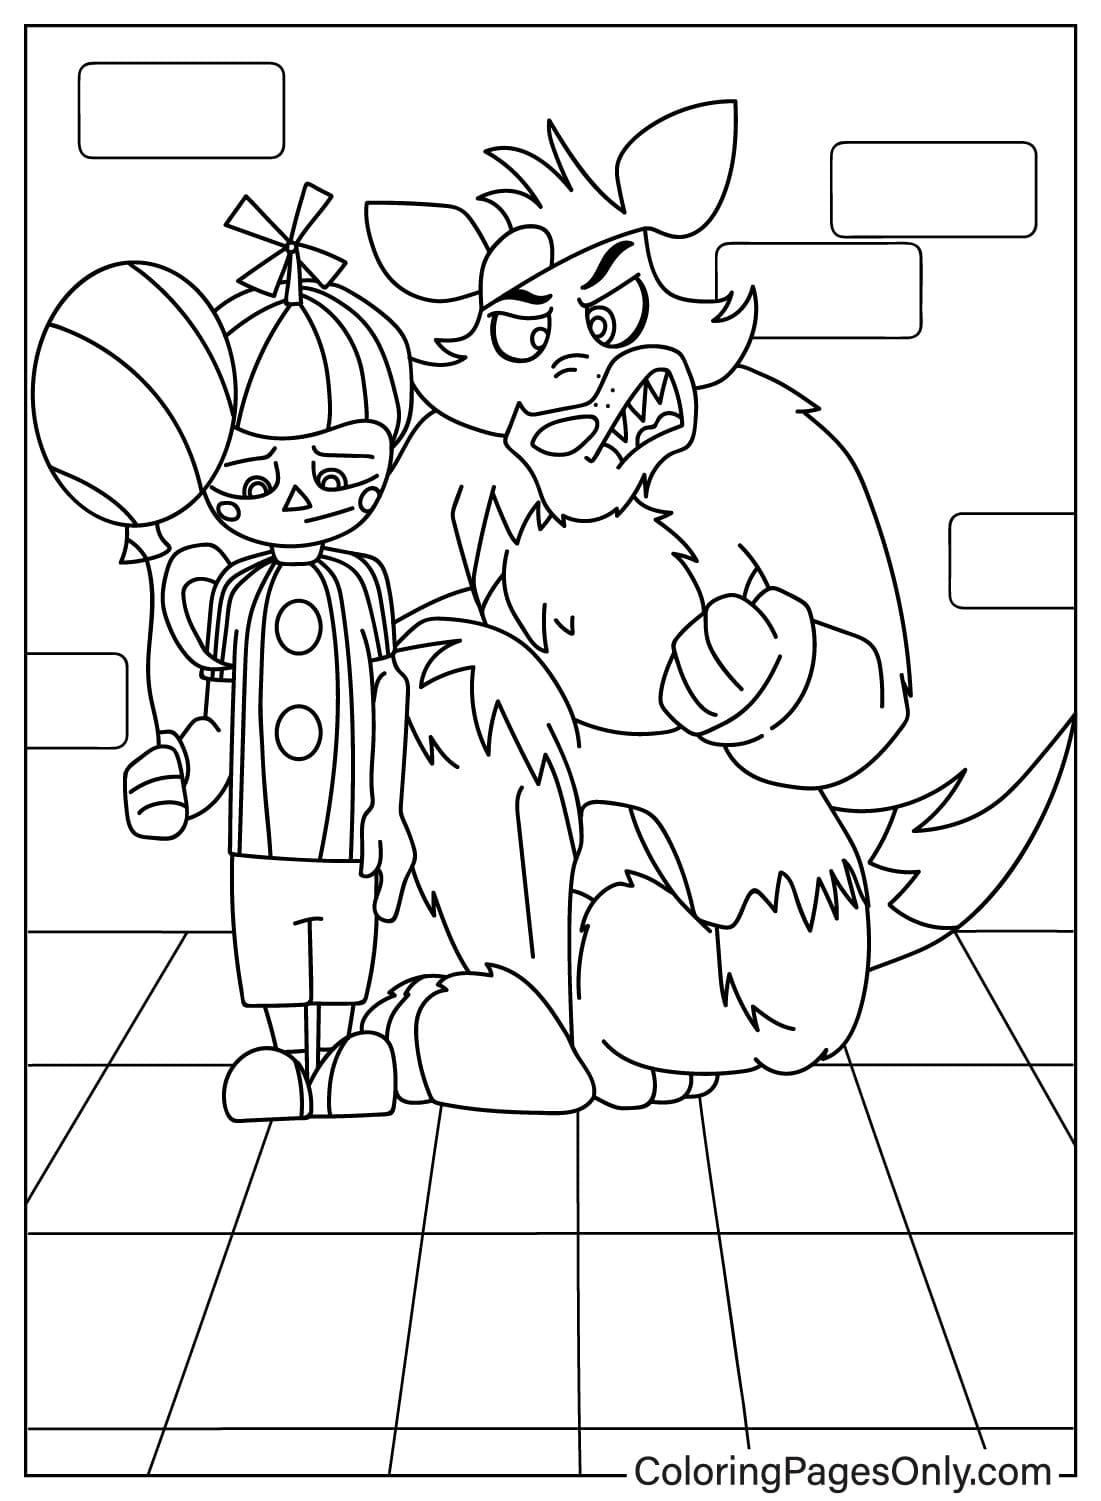 Foxy, Balloon Boy Coloring Page from Five Nights At Freddy's 2